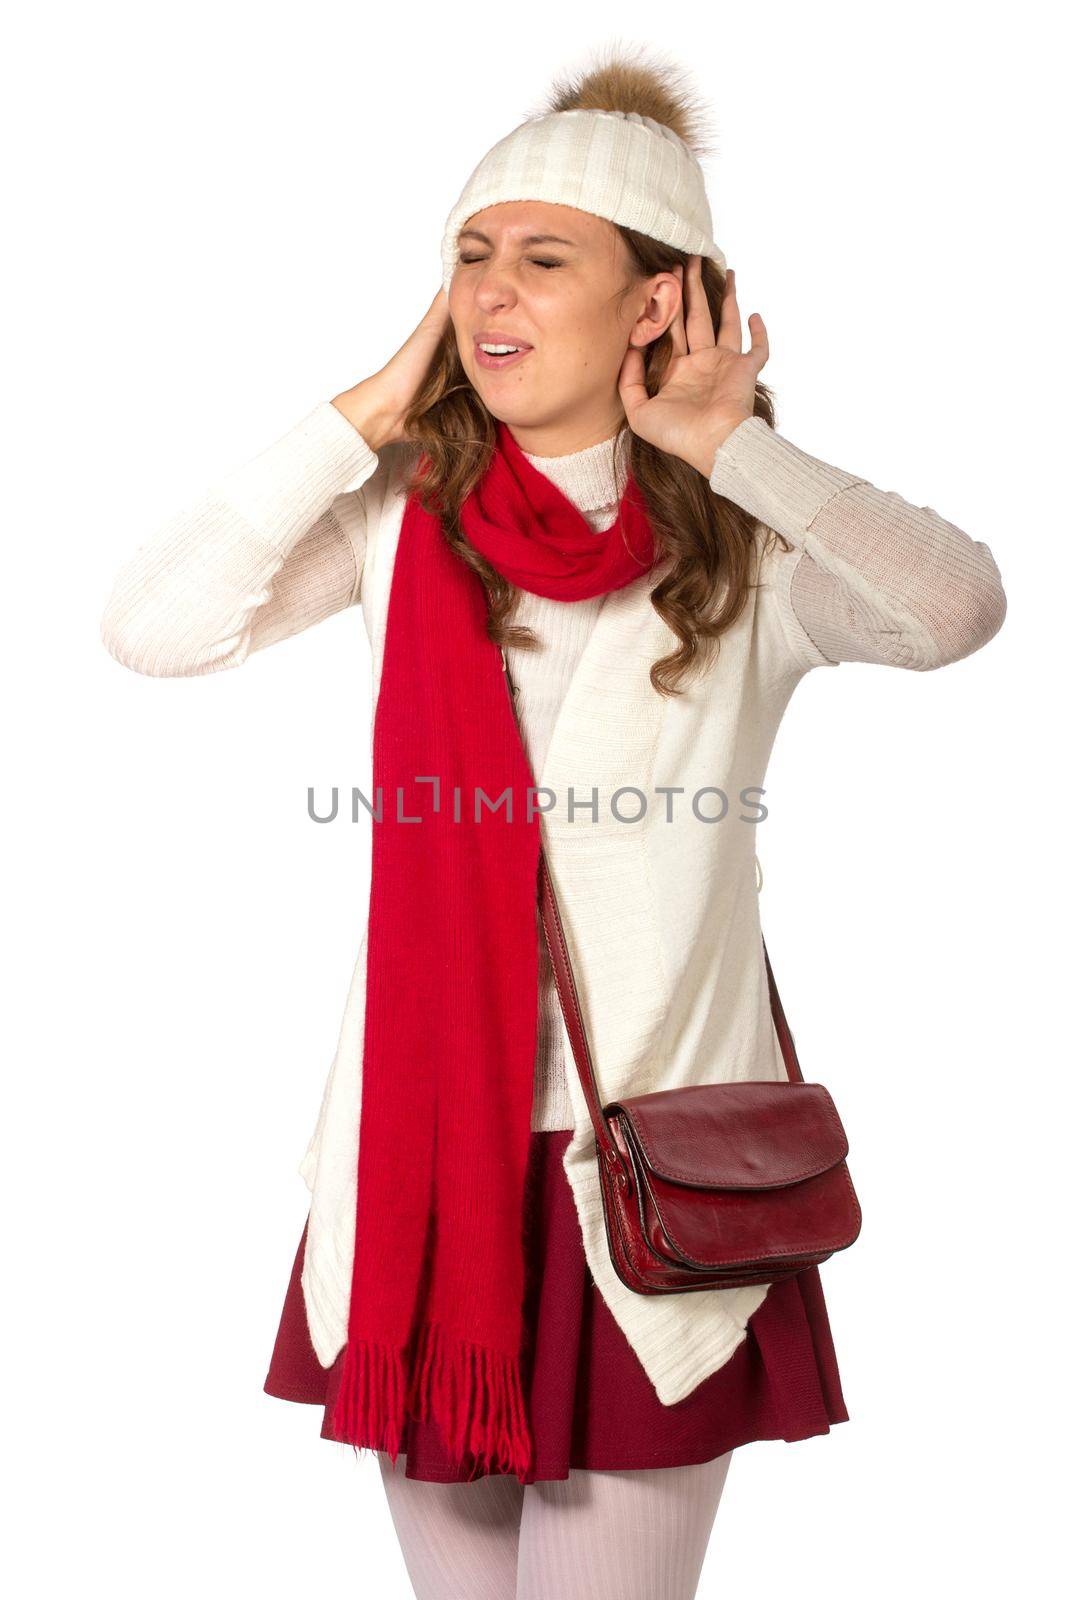 Lovely girl pretend to hear something, isolated on white